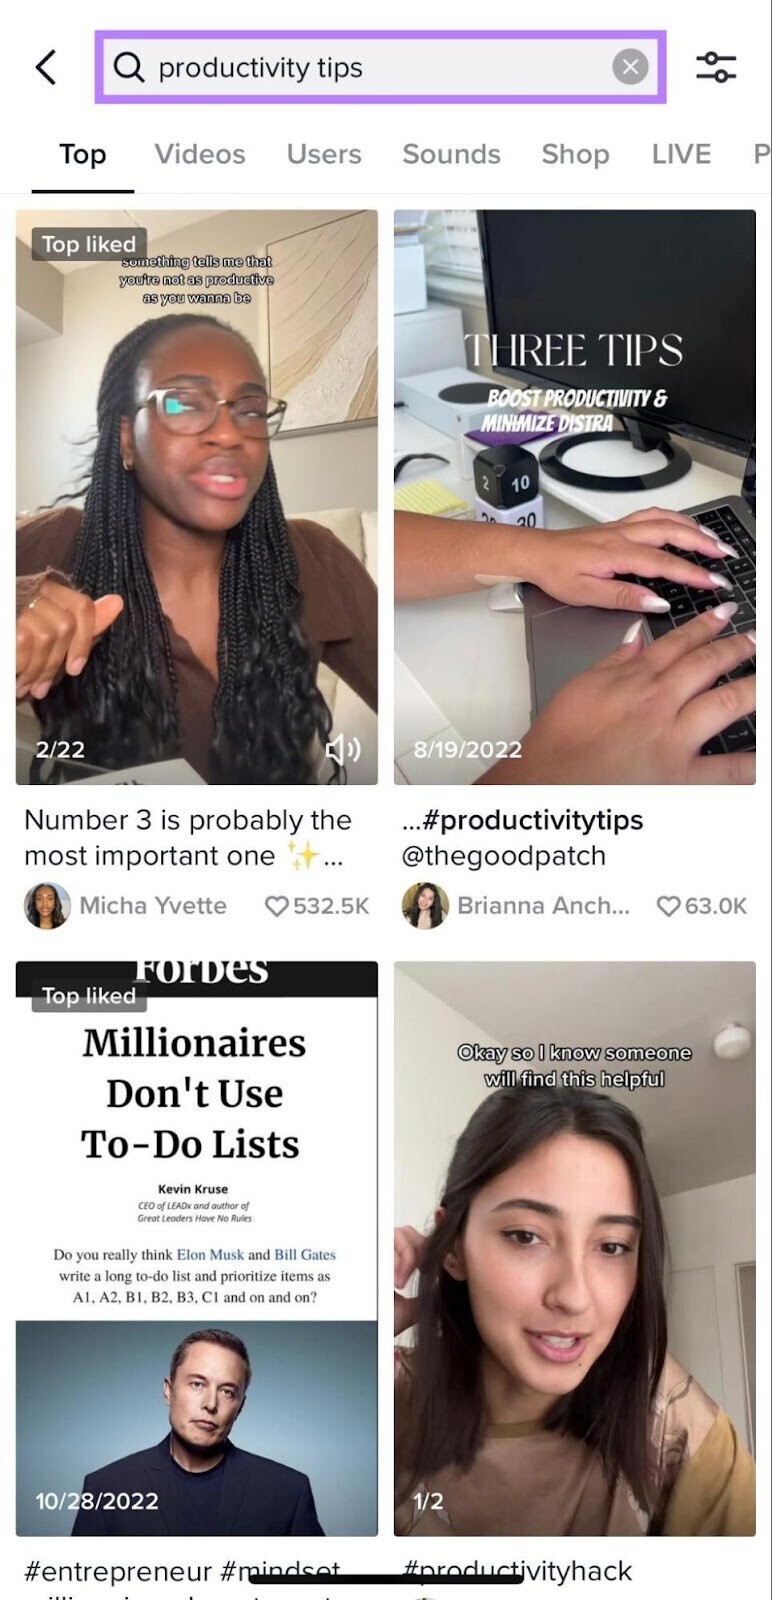 searching for "productivity tips" in TikTok’s search function